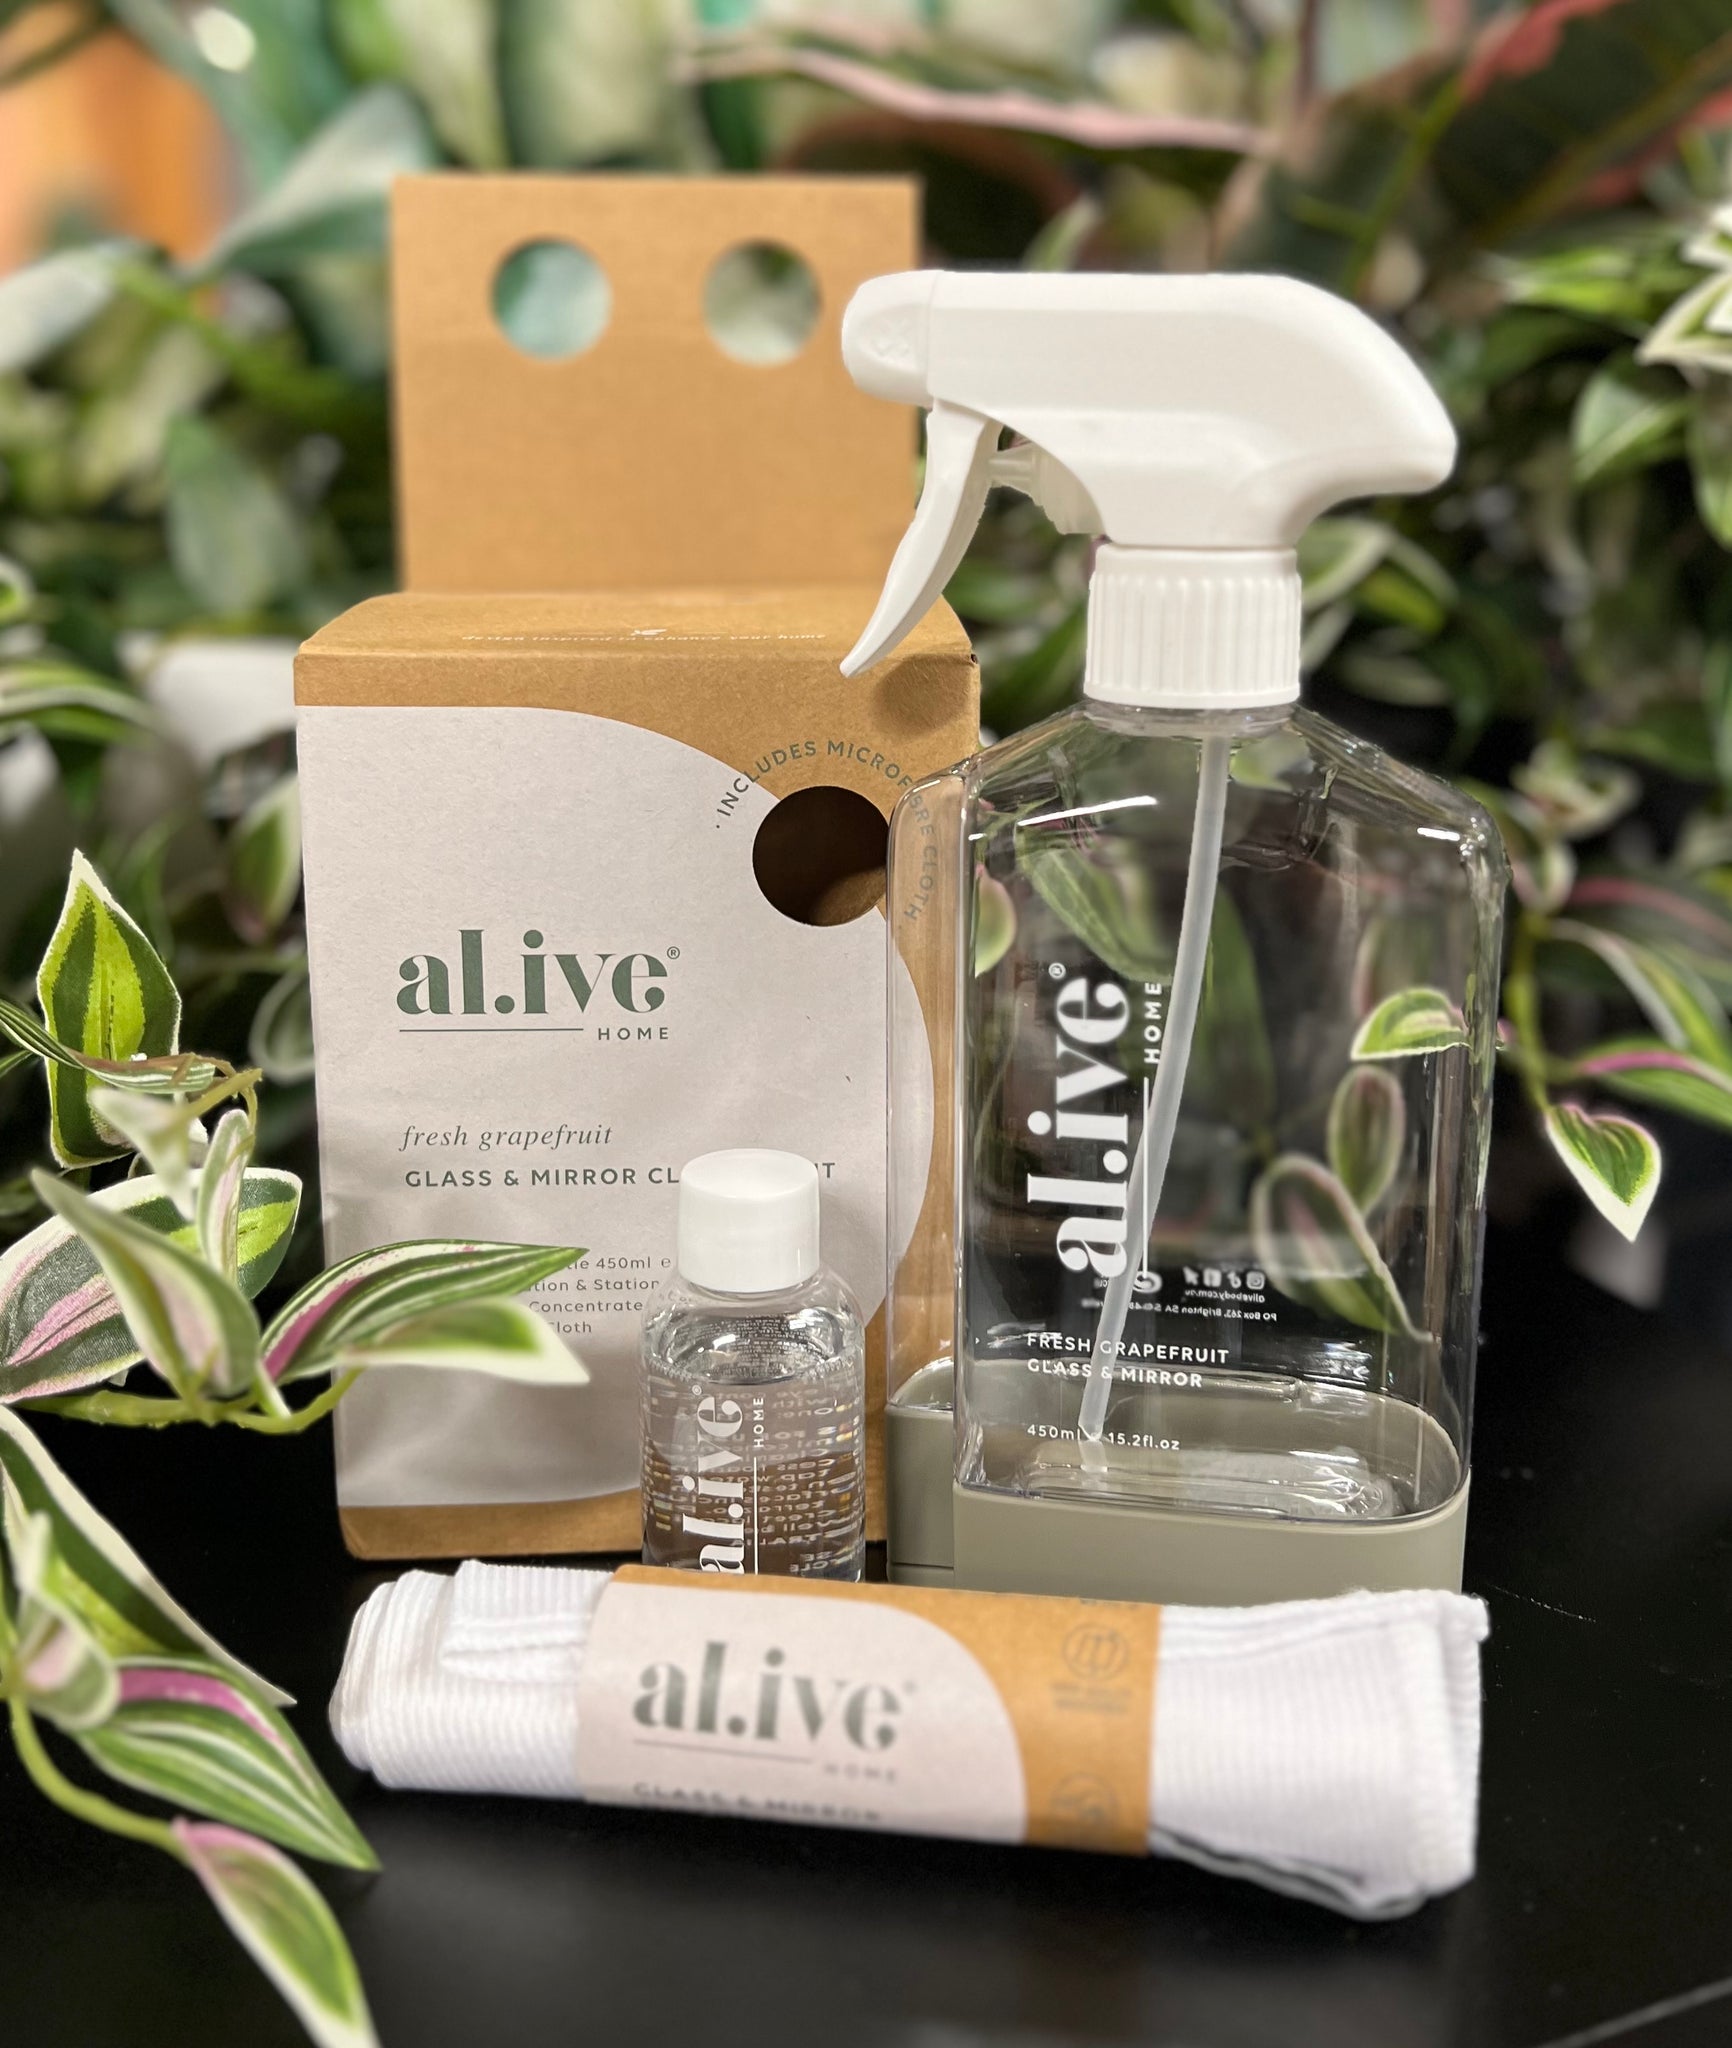 AL.IVE - GLASS AND MIRROR CLEANING KIT